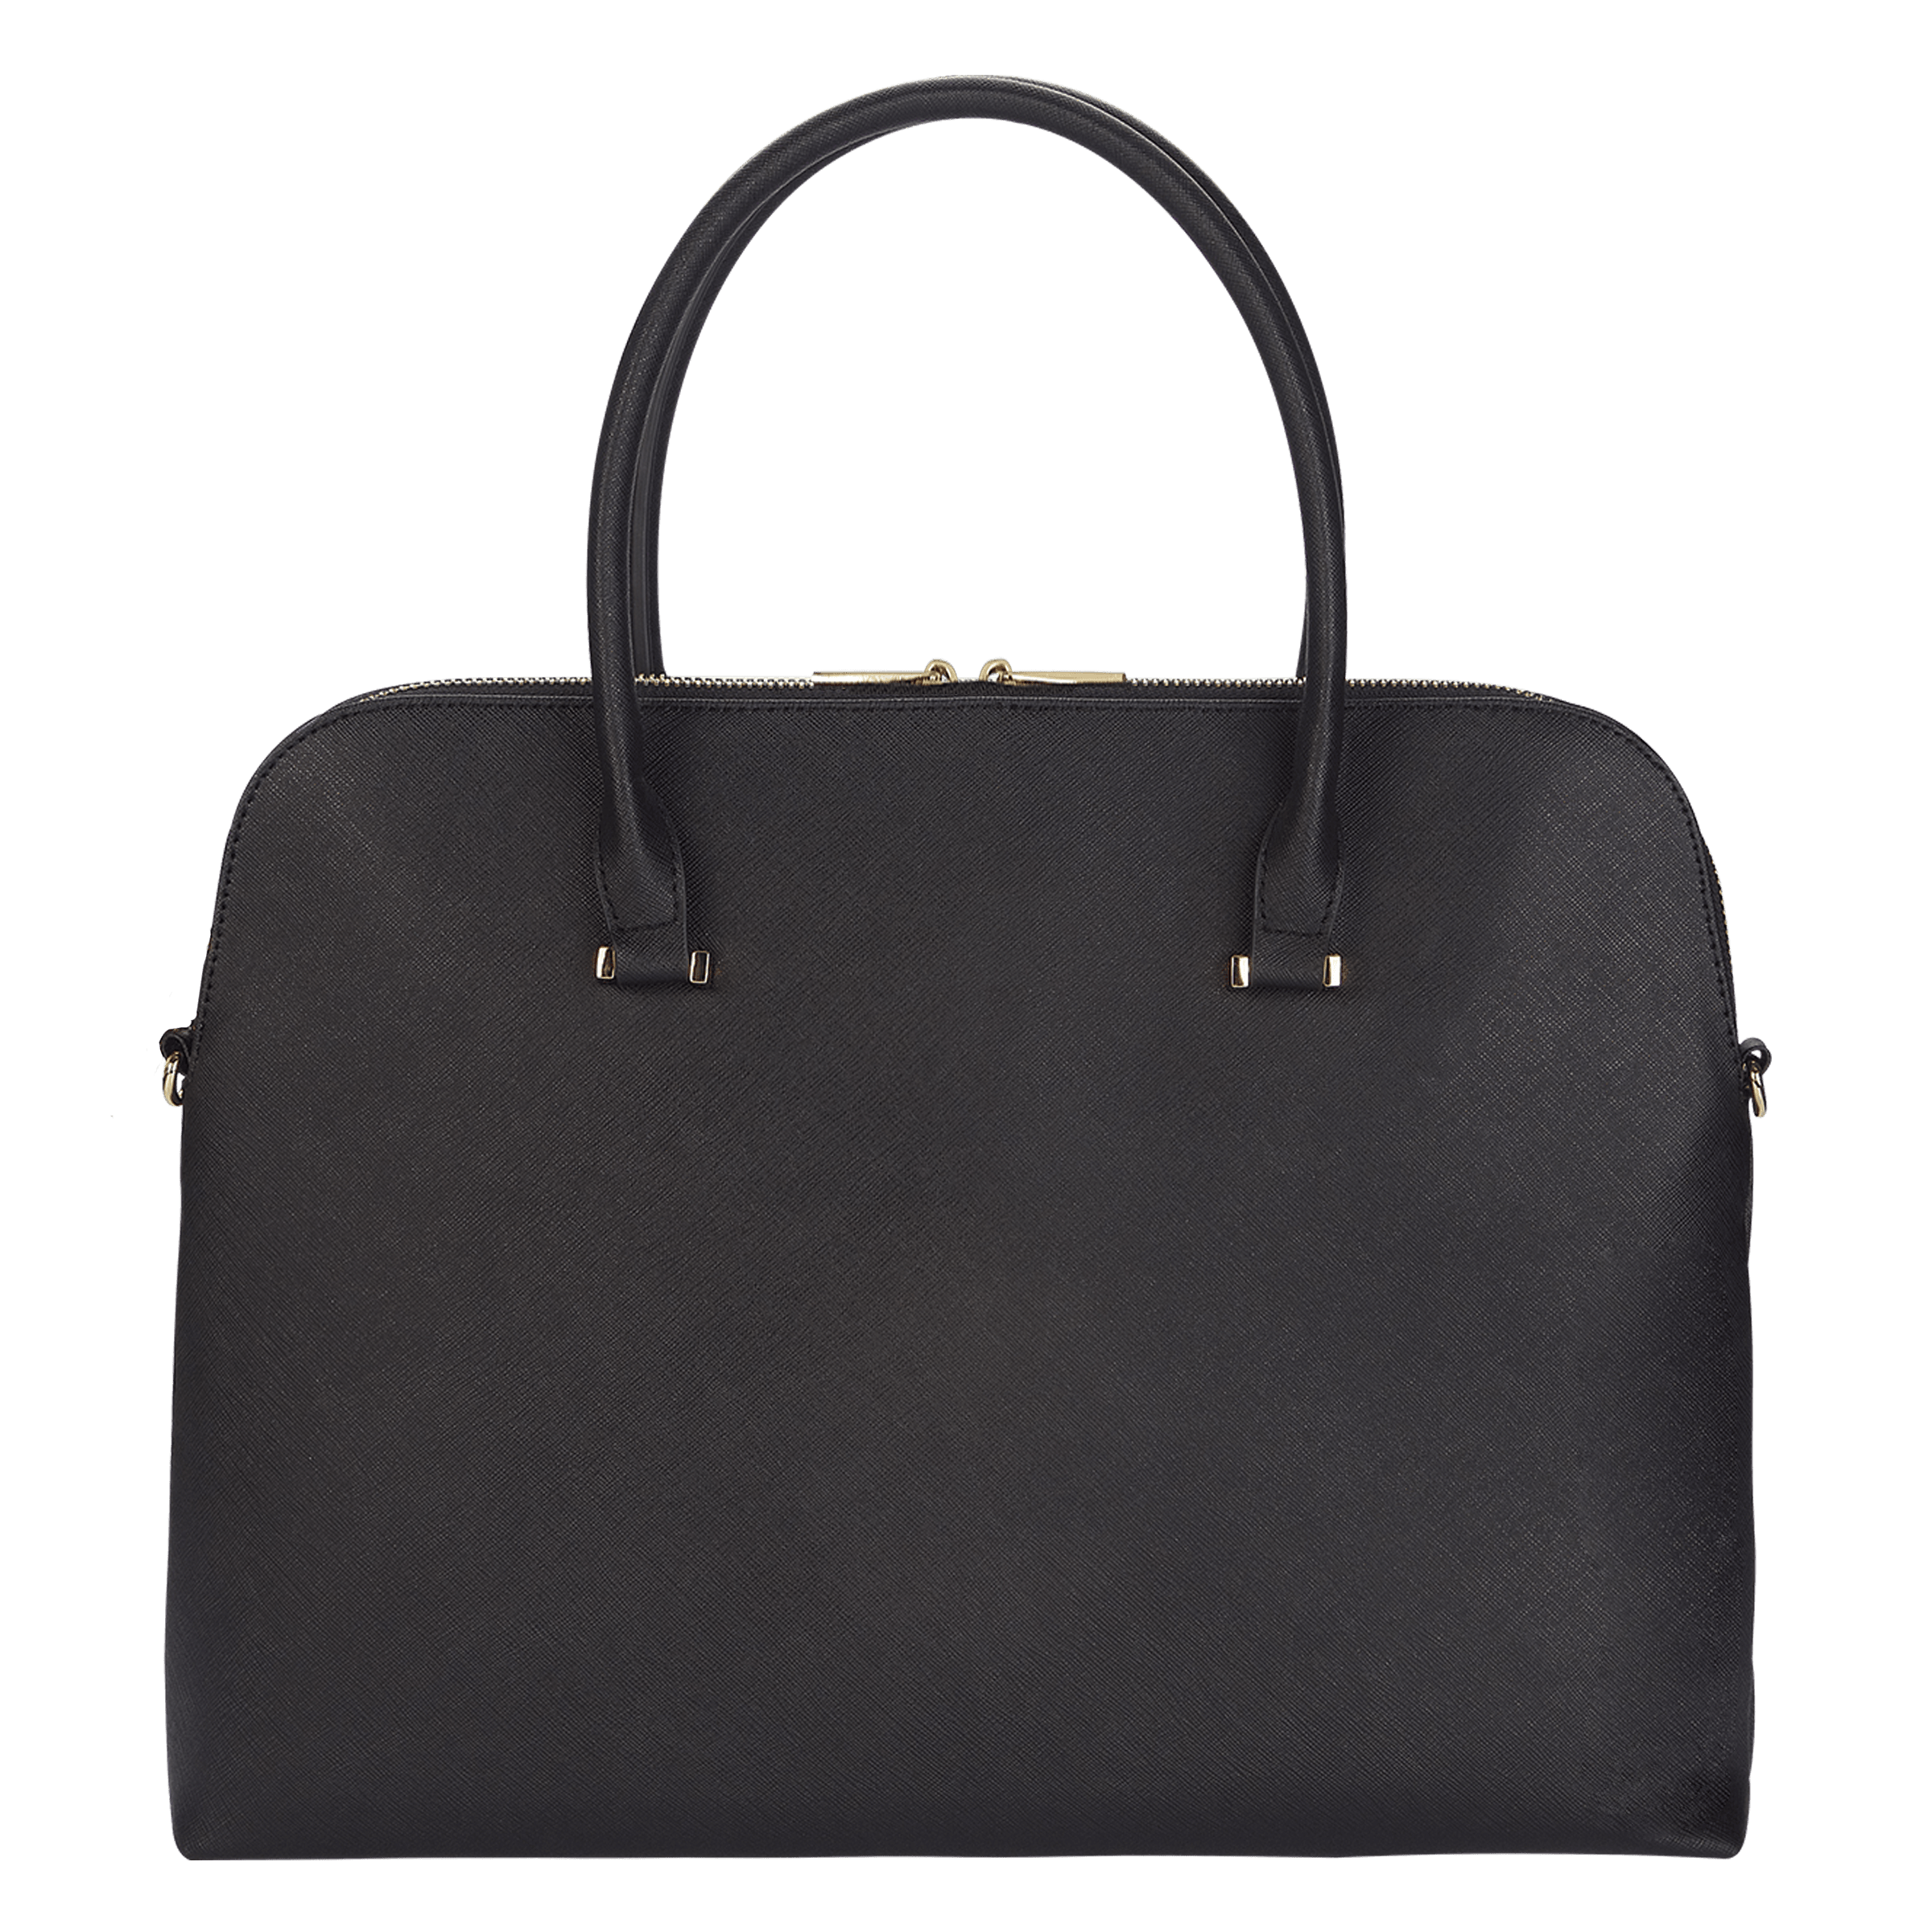 Office Laptop Bags for Women and Ladies, Crafted in Leather